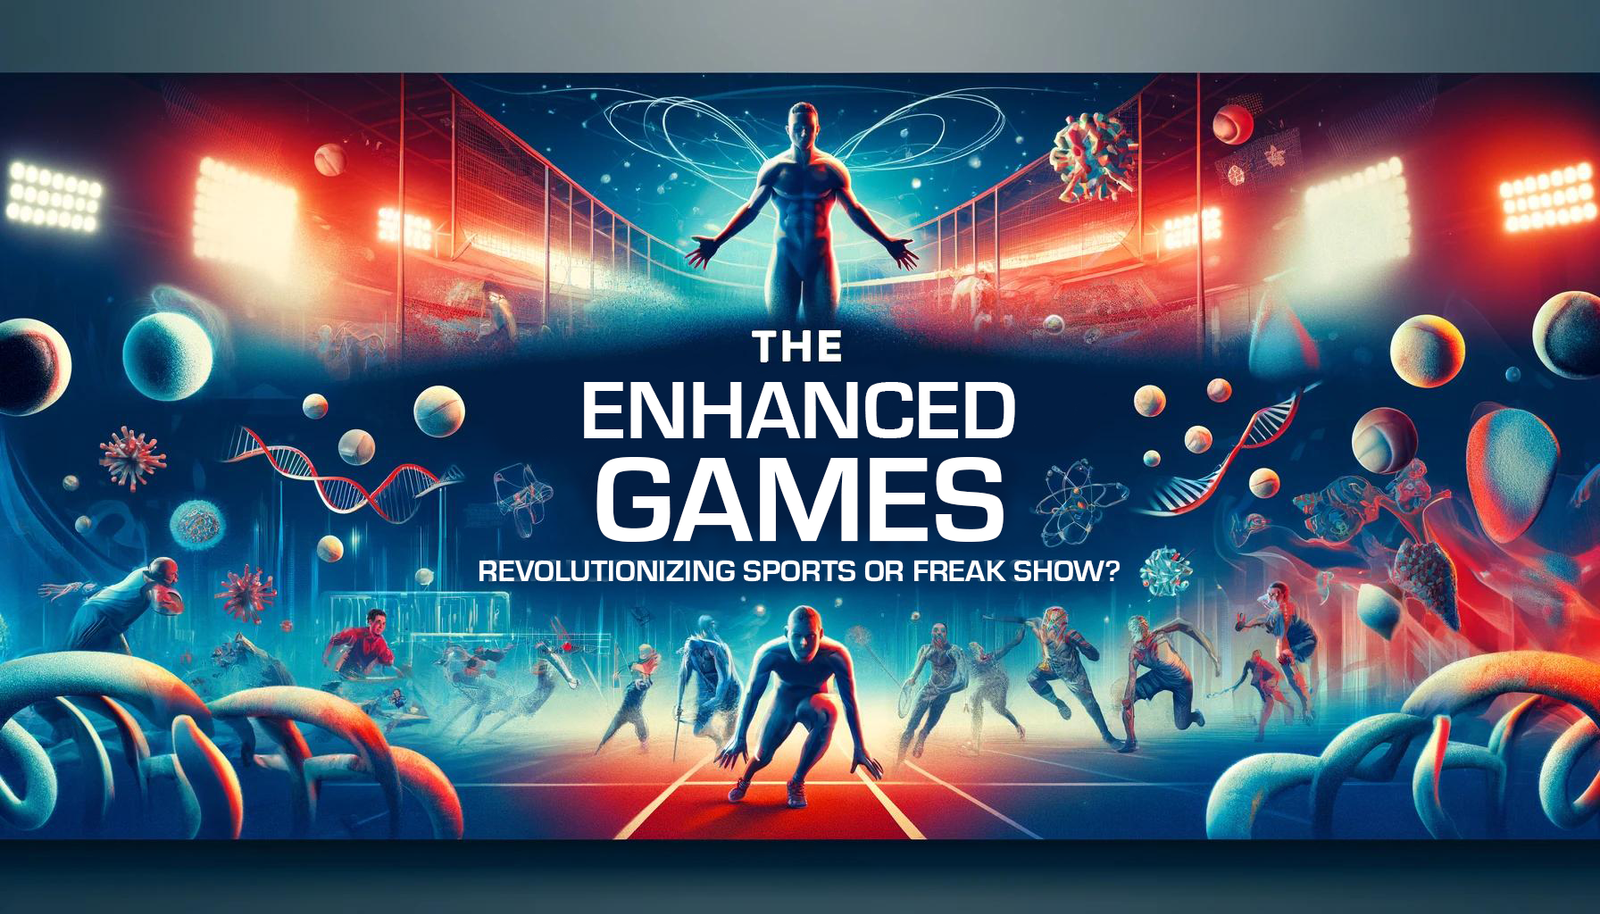 Featured image for “The Enhanced Games: Revolutionizing Sports or Freak Show?”